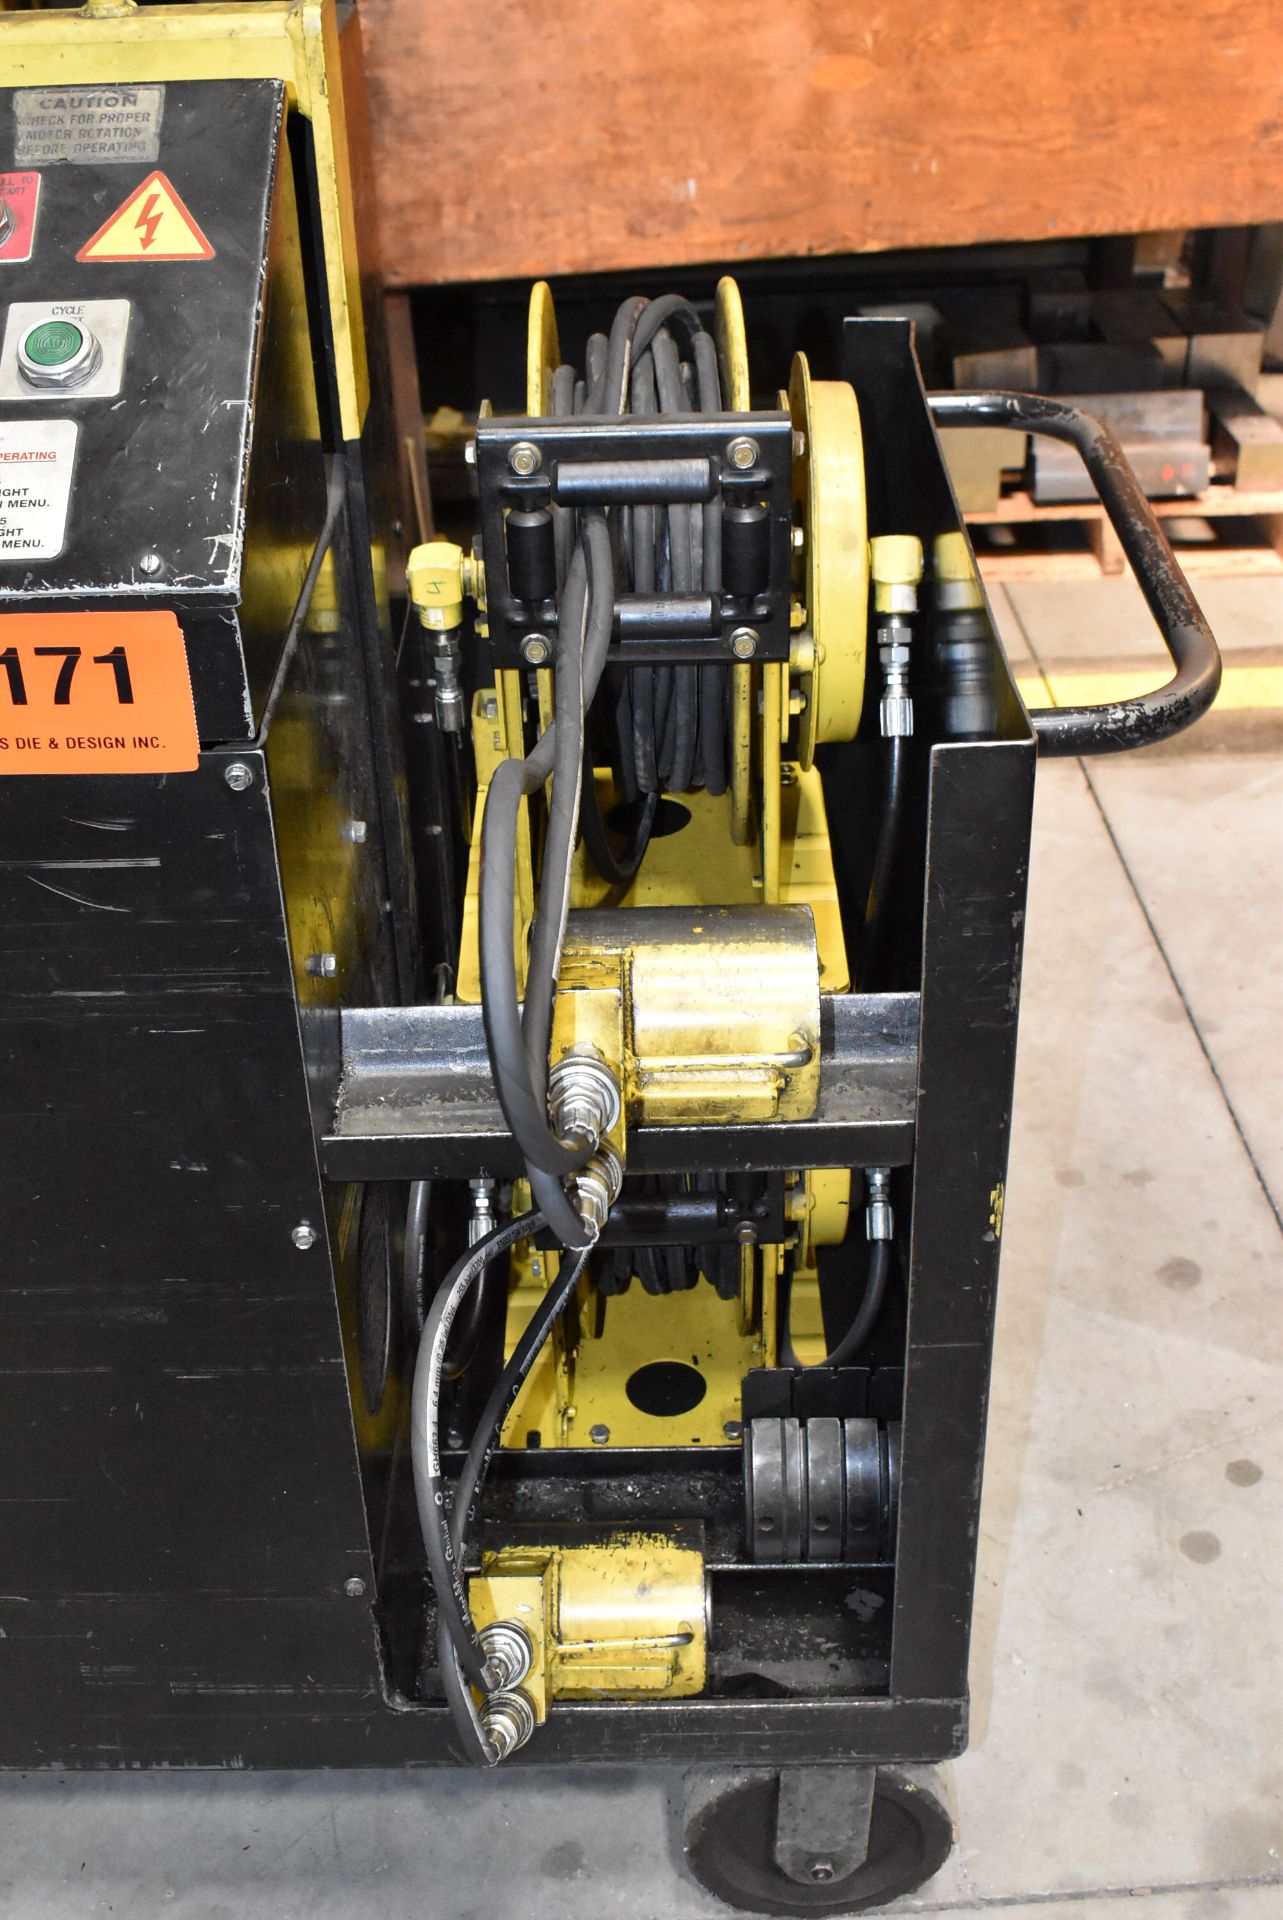 ANCHOR LAMINA HYDRAULIC DIE SETTER WITH E300 DIGITAL MICROPROCESSOR CONTROL, (4) HYDRAULIC LIFT - Image 3 of 5